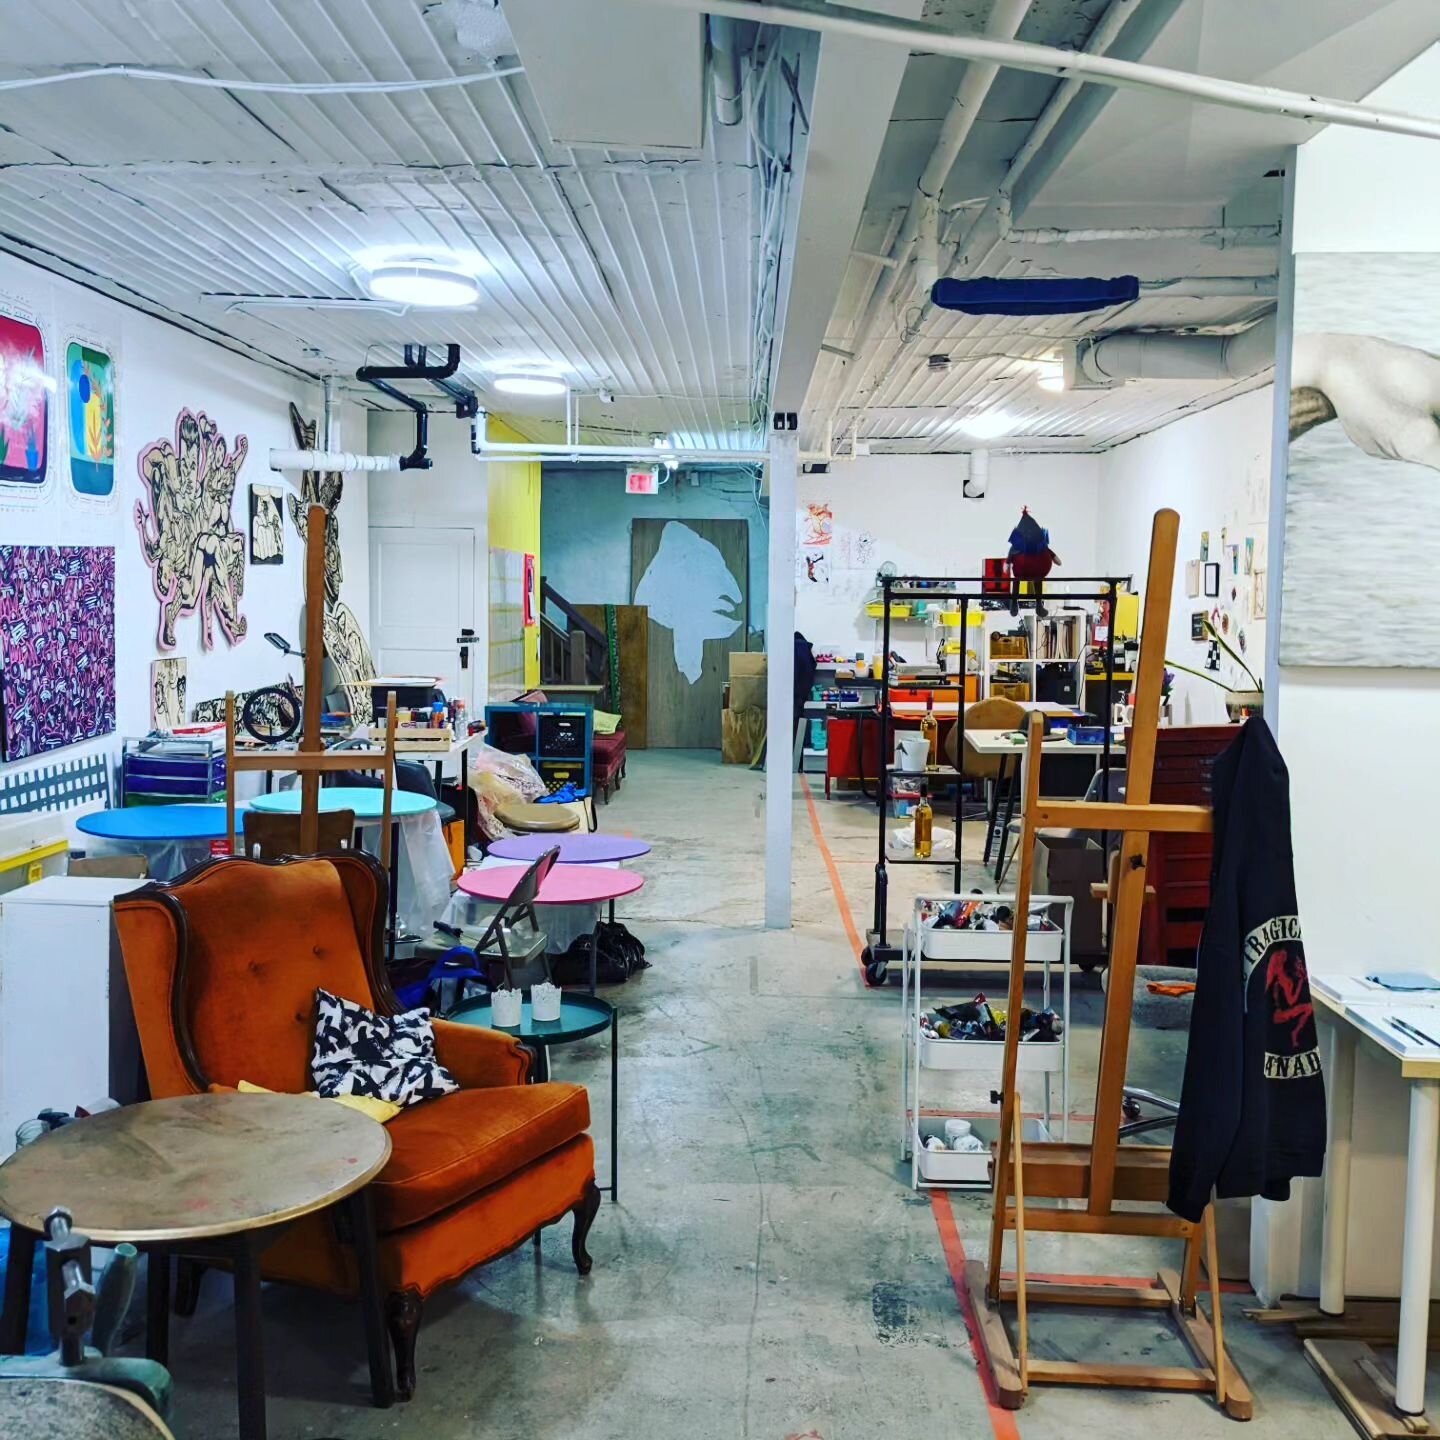 WE HAVE A SPOT AVAILABLE!
Looking for a shared space to create your art? We have a current opportunity to become a @spareroombarrie
Roomie. 

You'll gain 24 hour access to the artist studios, main gallery and lounge. Located along the waterfront in d